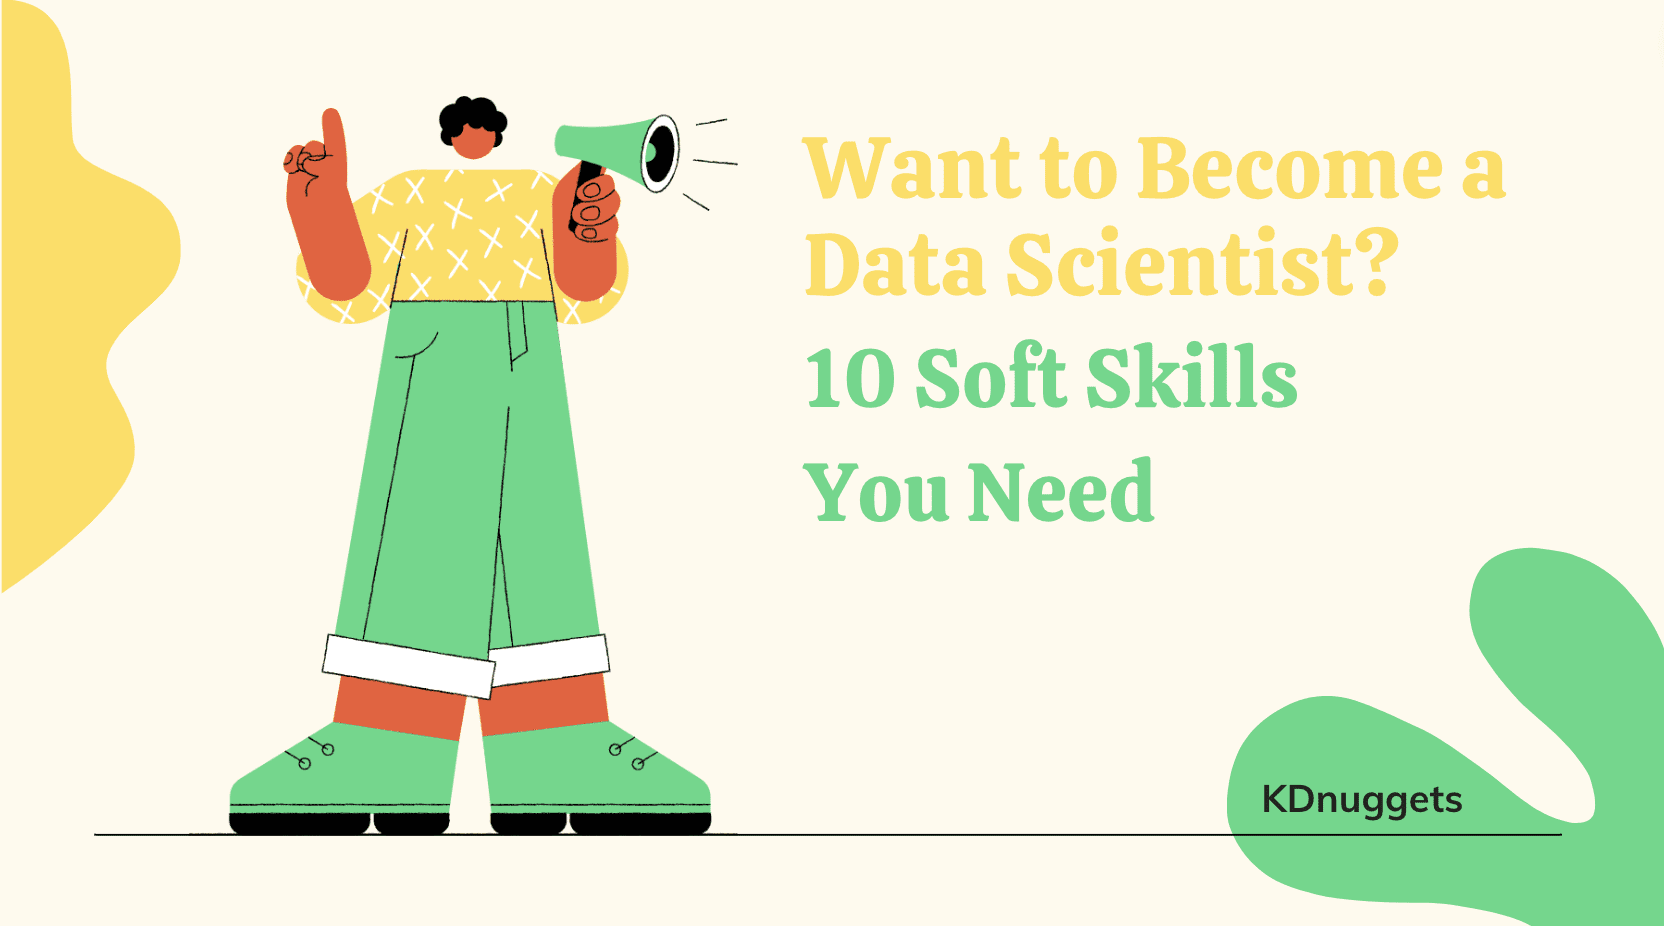 Do you want to become a data scientist?  Part 2: 10 interpersonal skills you need